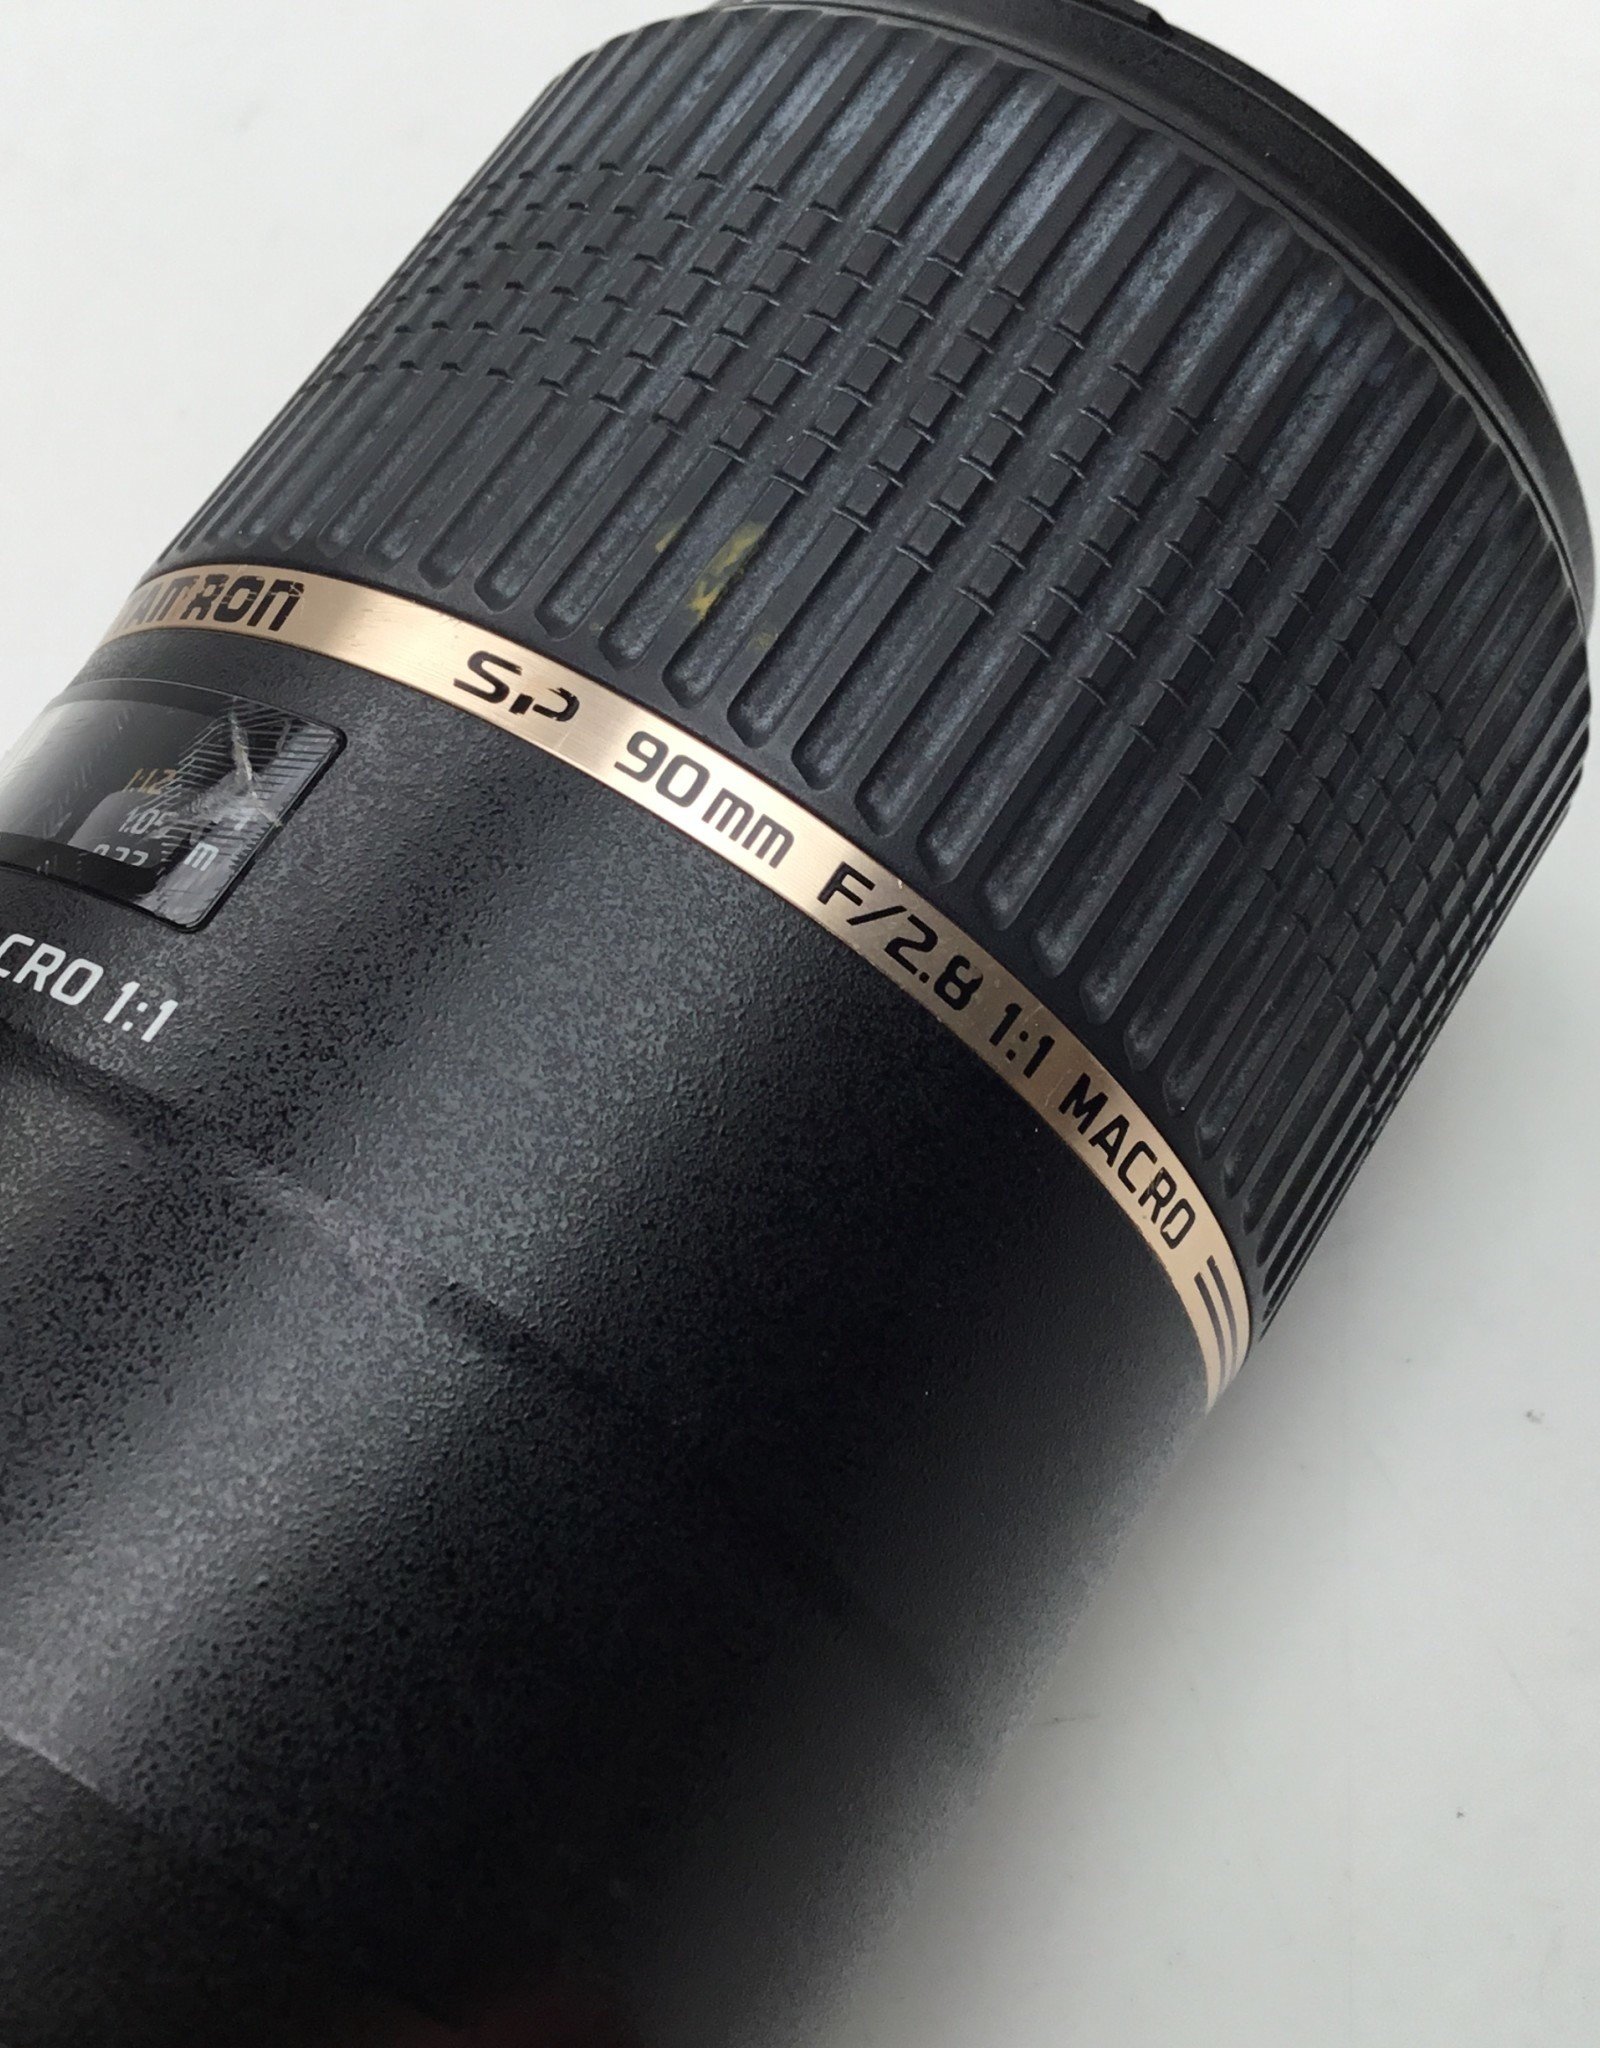 TAMRON Tamron SP 90mm f2.8 Macro VC Lens for Canon EF Used Fair